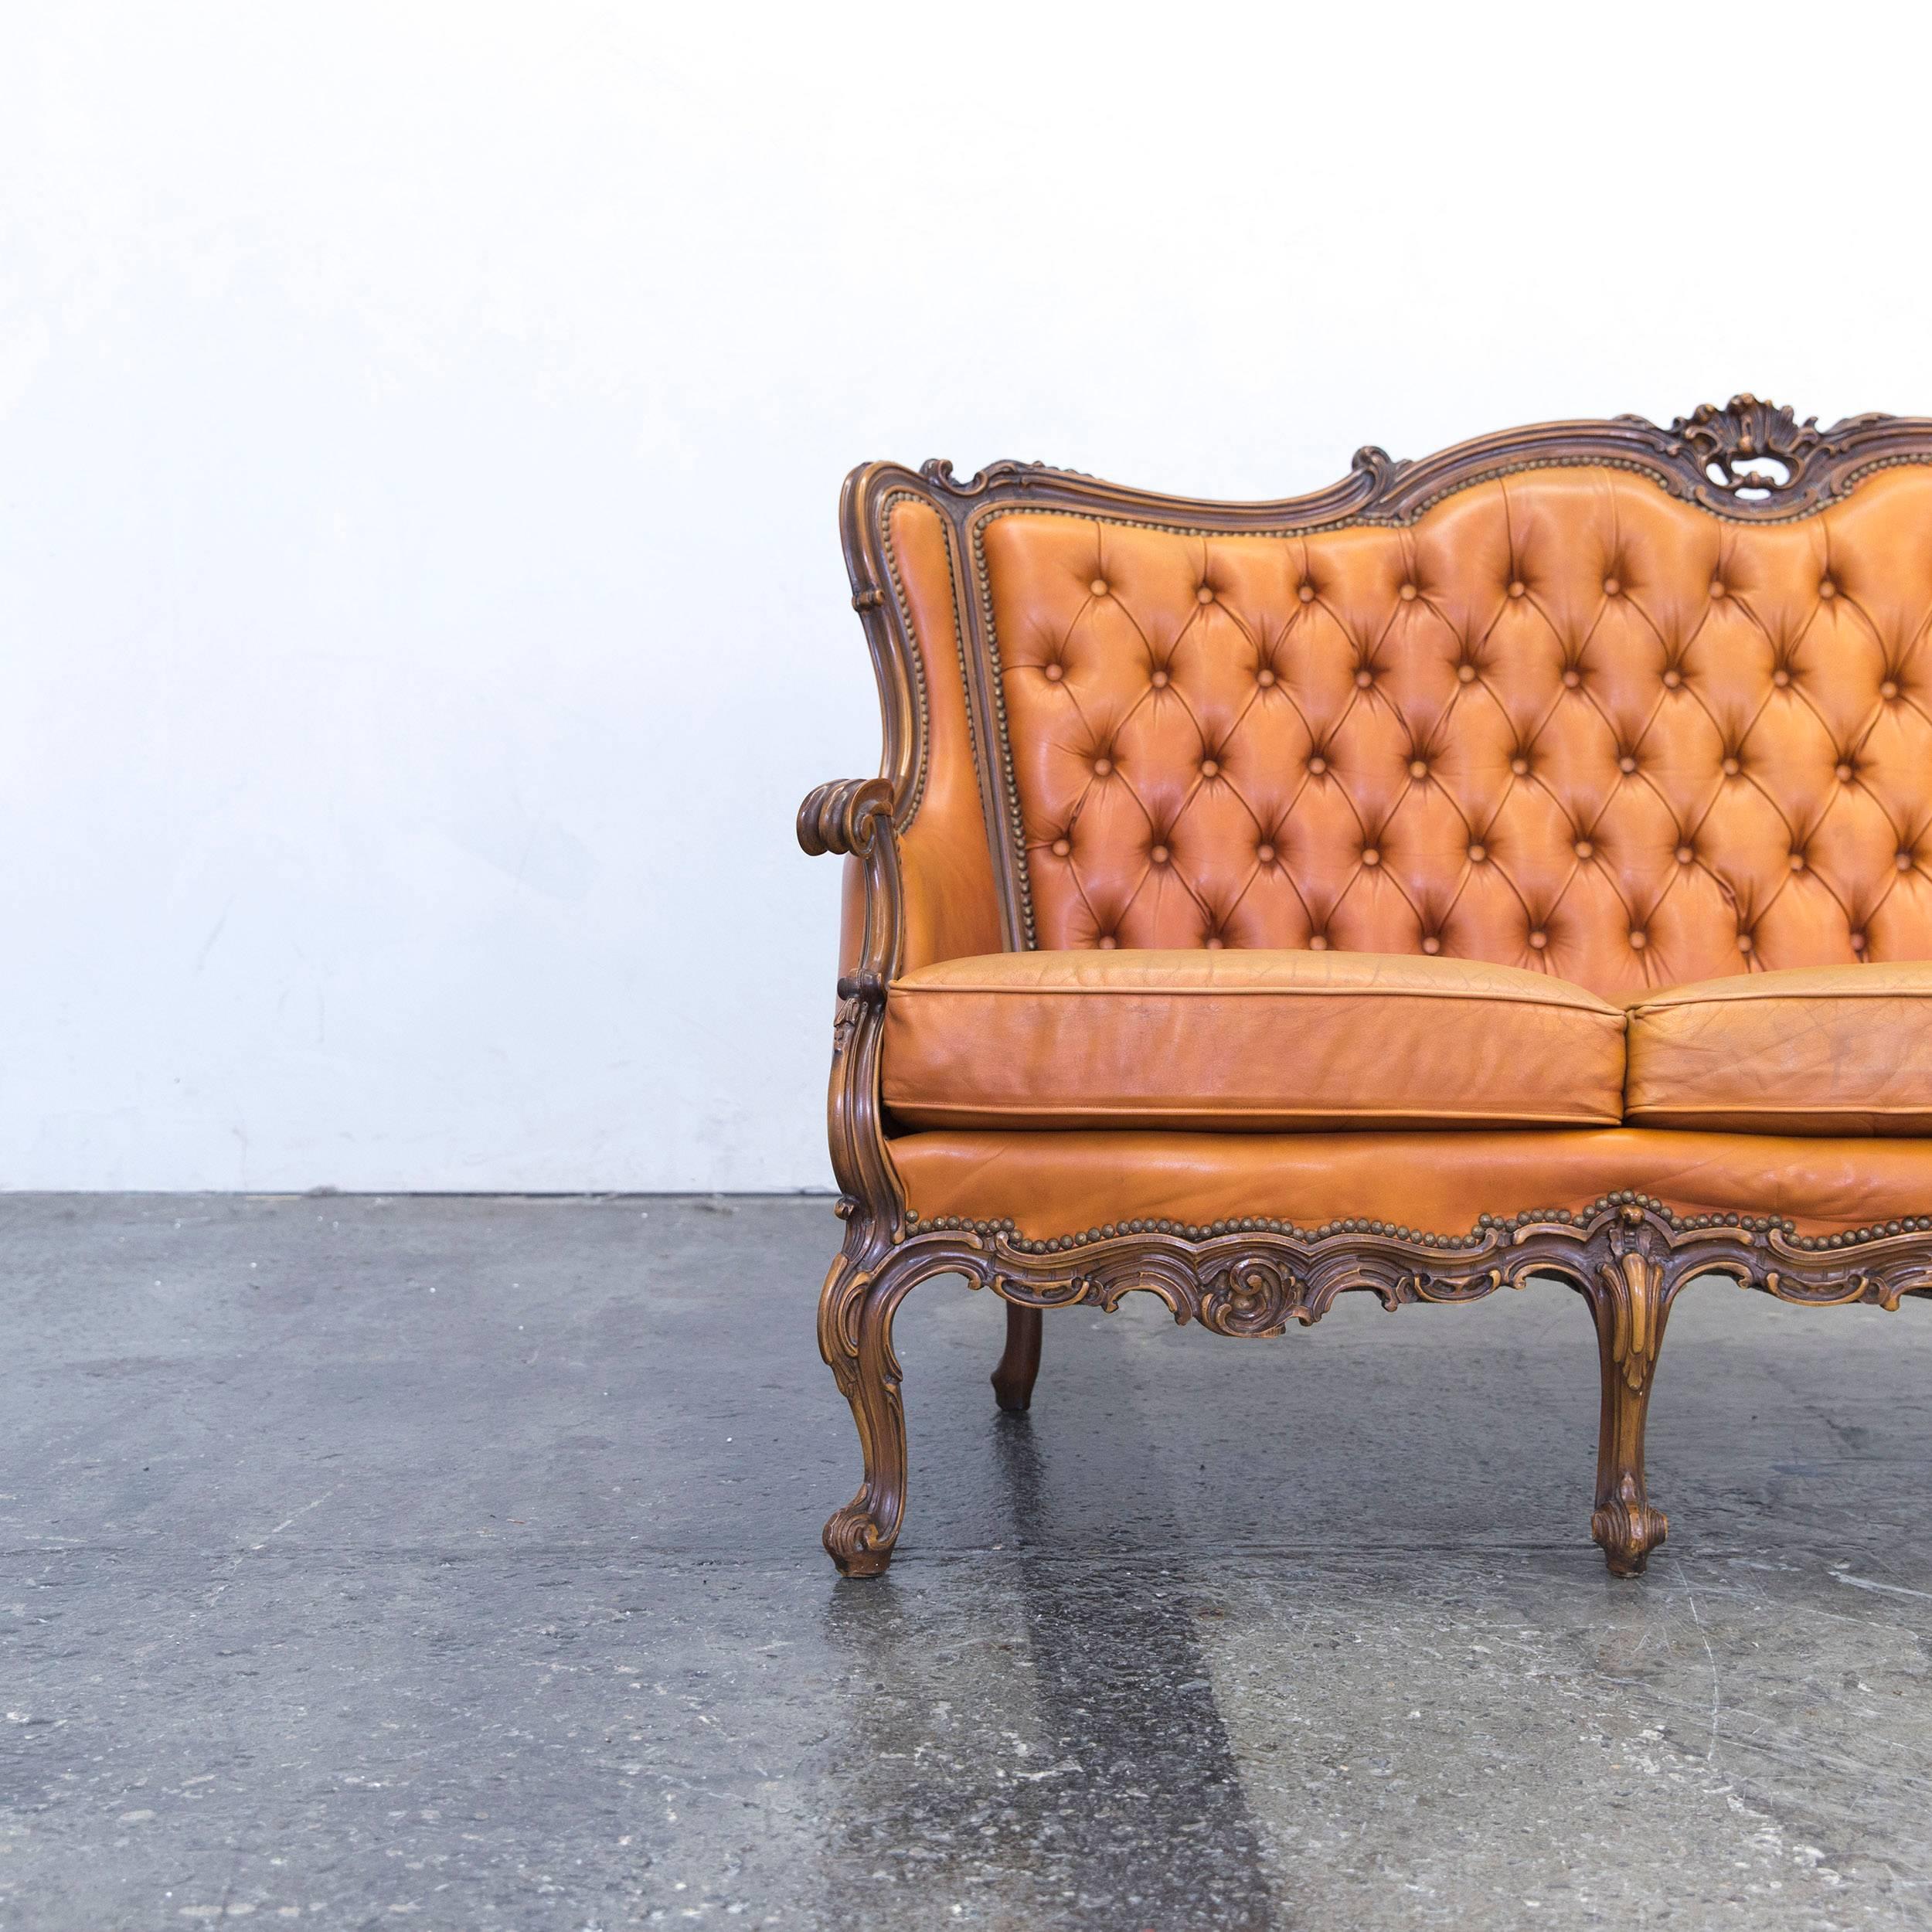 Cognac brown colored original Chesterfield leather sofa in a vintage design, made for pure comfort and elegance.